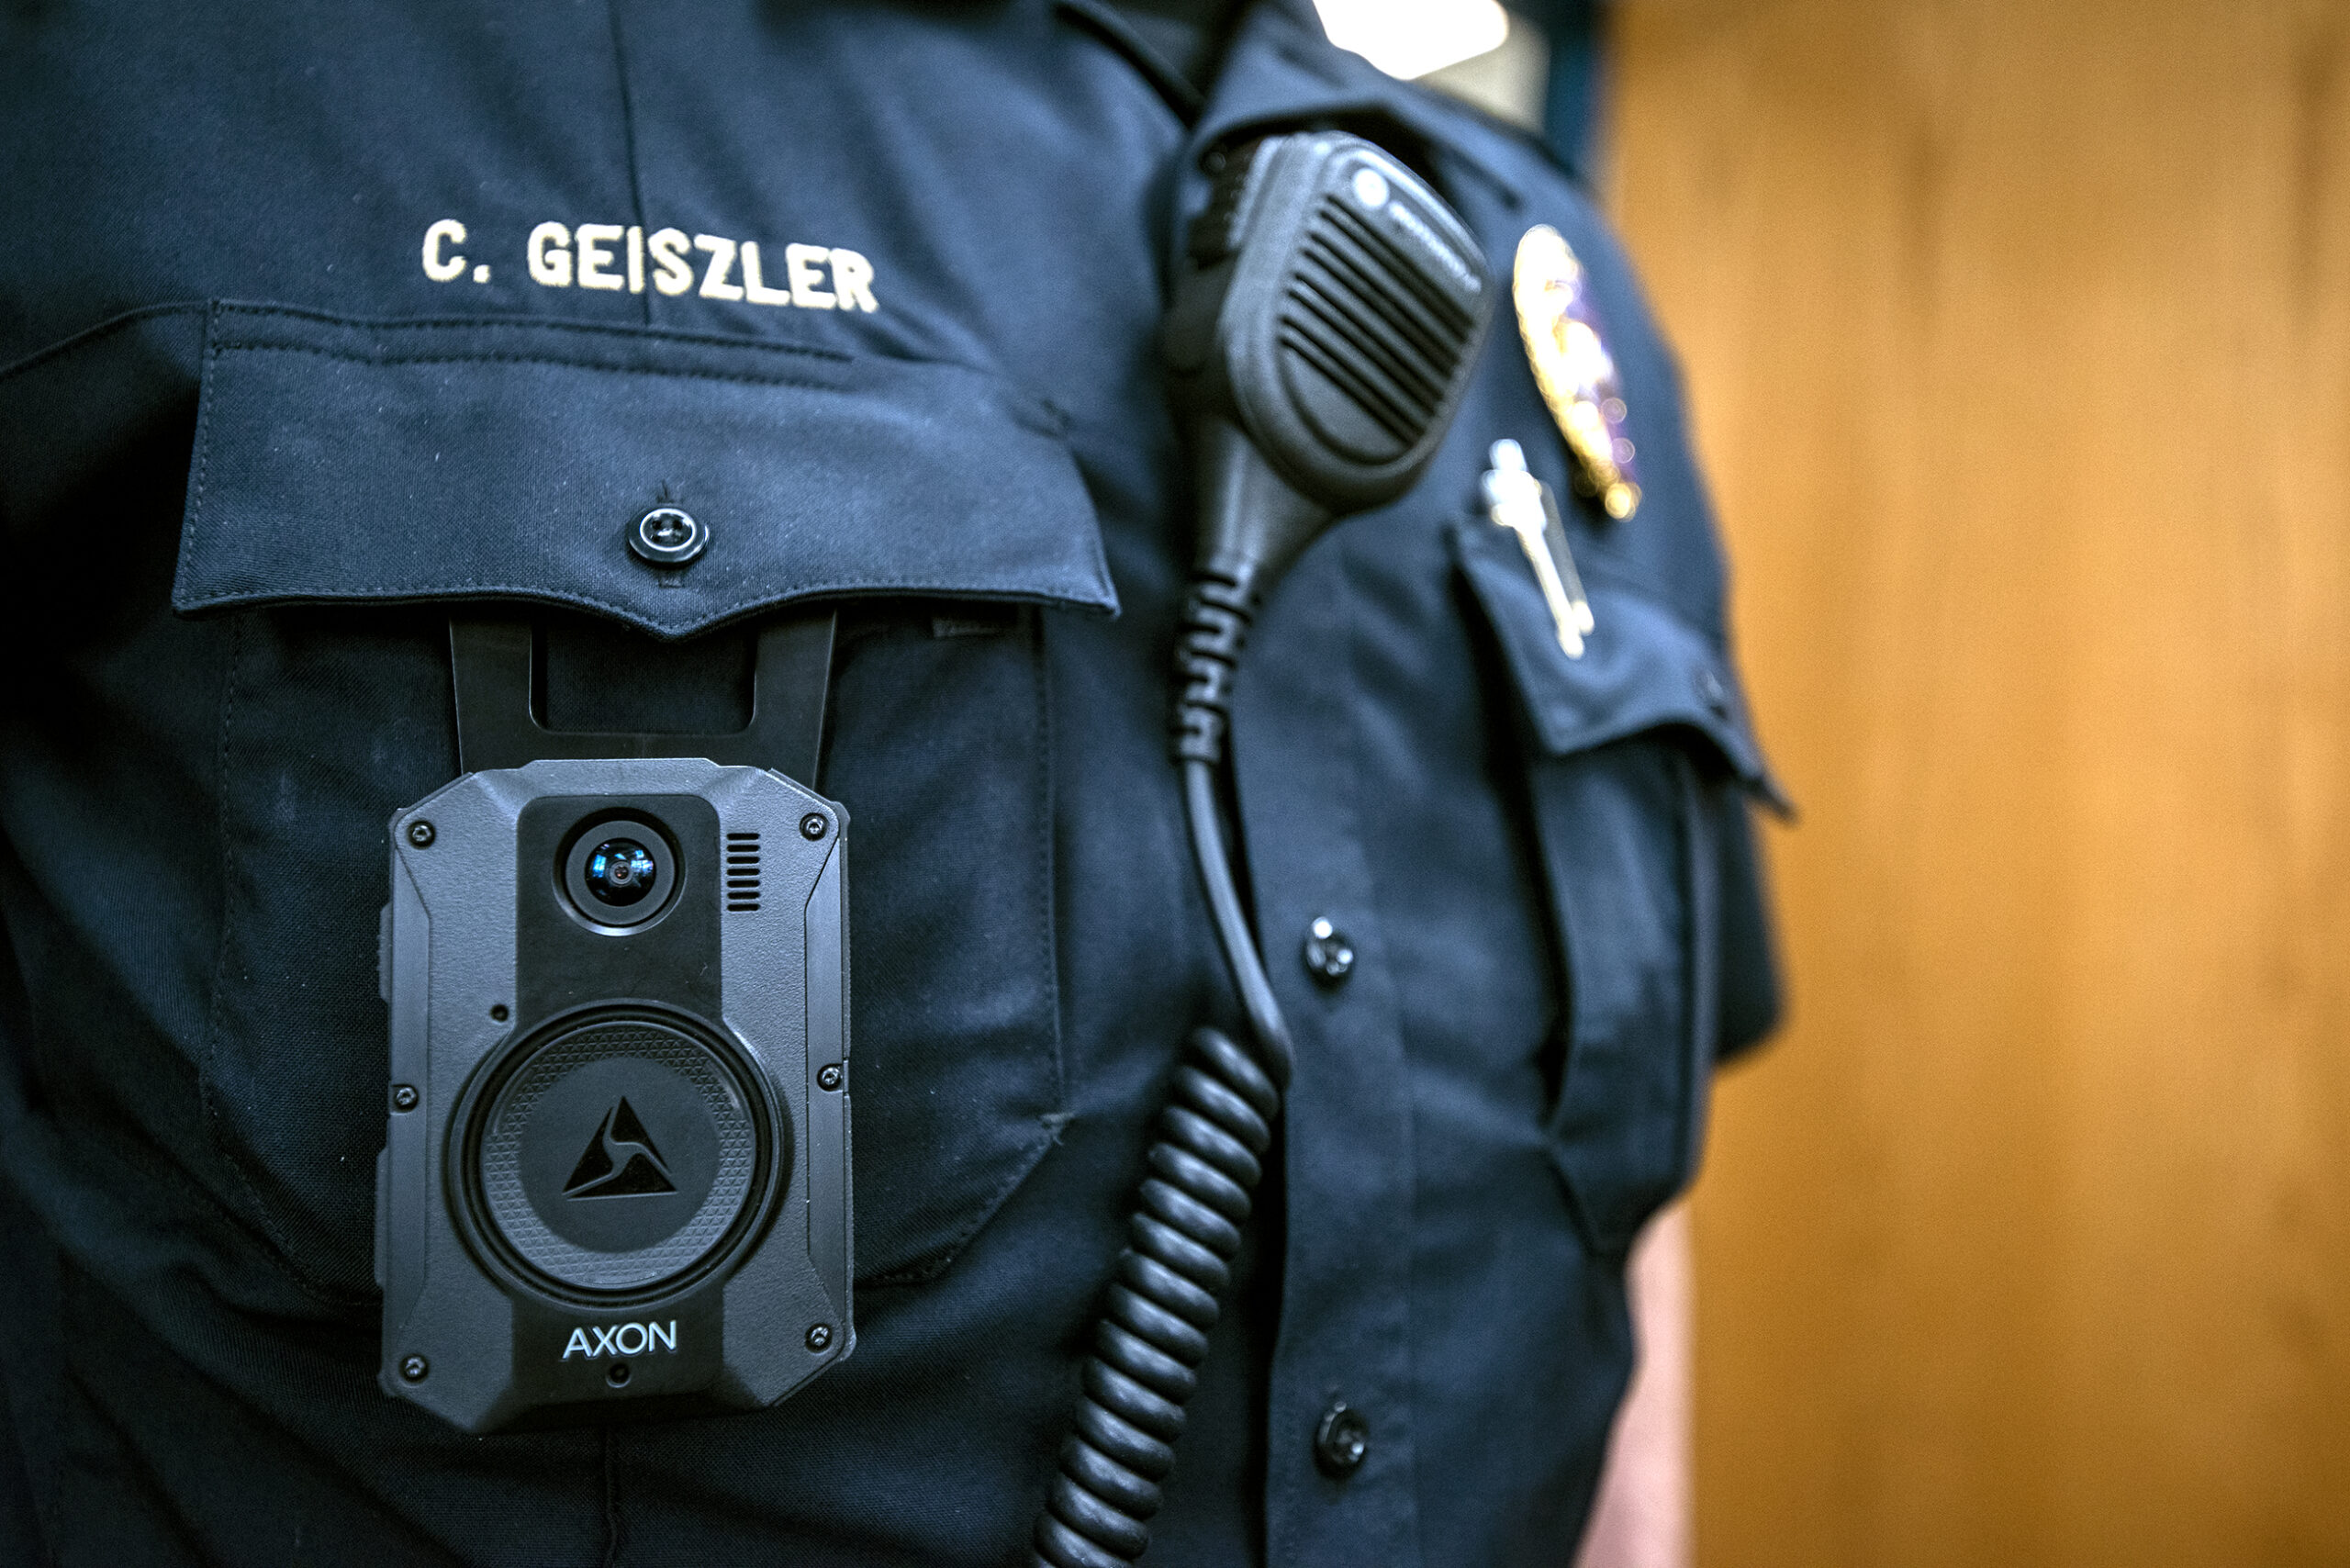 A body camera is clipped onto the pocket of a police officer's uniform.